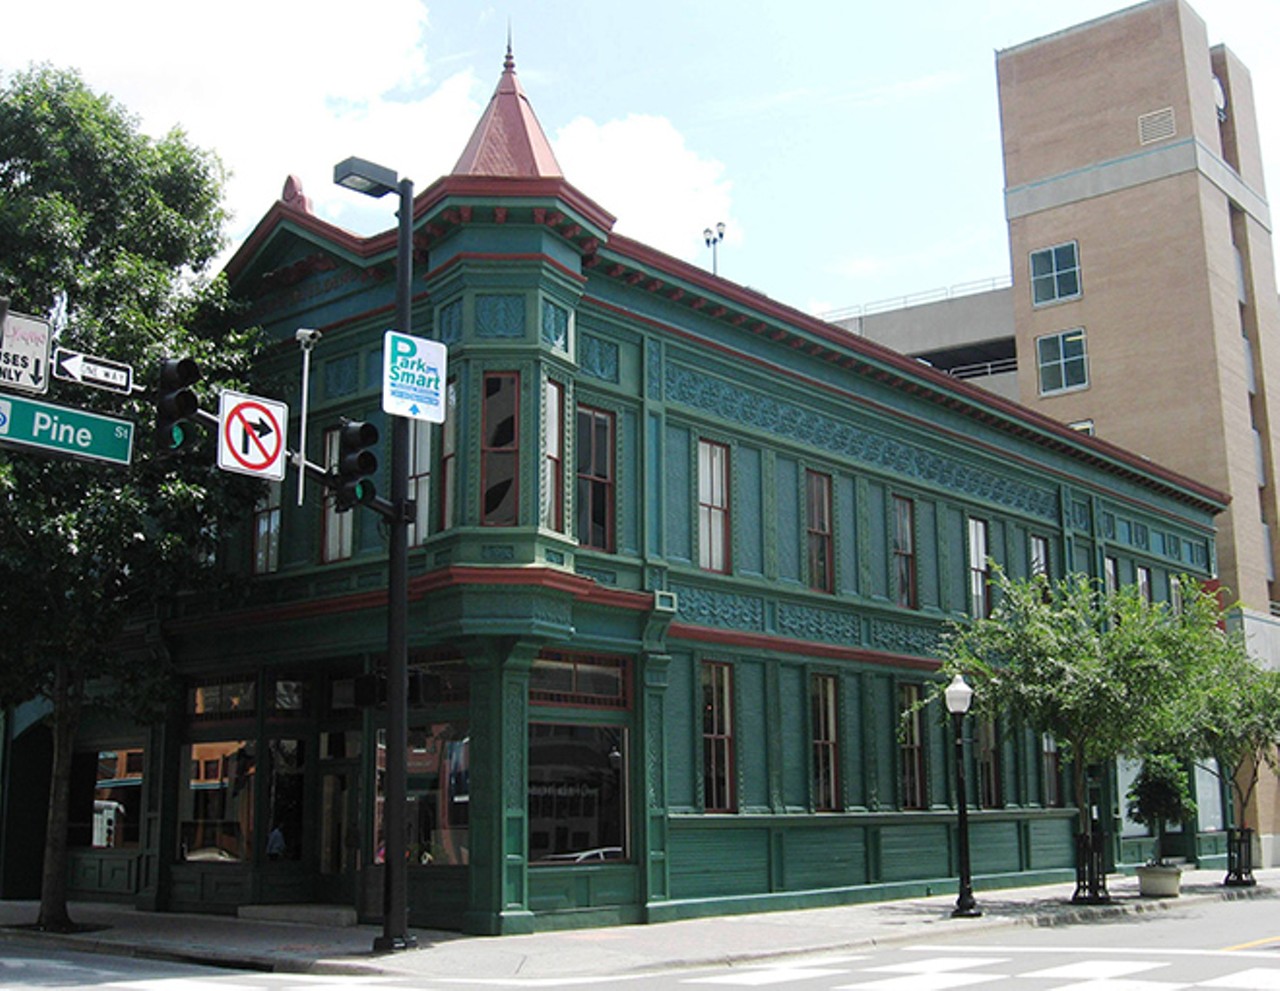 Rogers Building, OrlandoThis former gentlemen's club is named after one Gordon Rogers. He and his wife seem to have a soft spot for this building as their spirits have been haunting the second floor window and first floor art gallery.Image via thecraftsmanblog.com